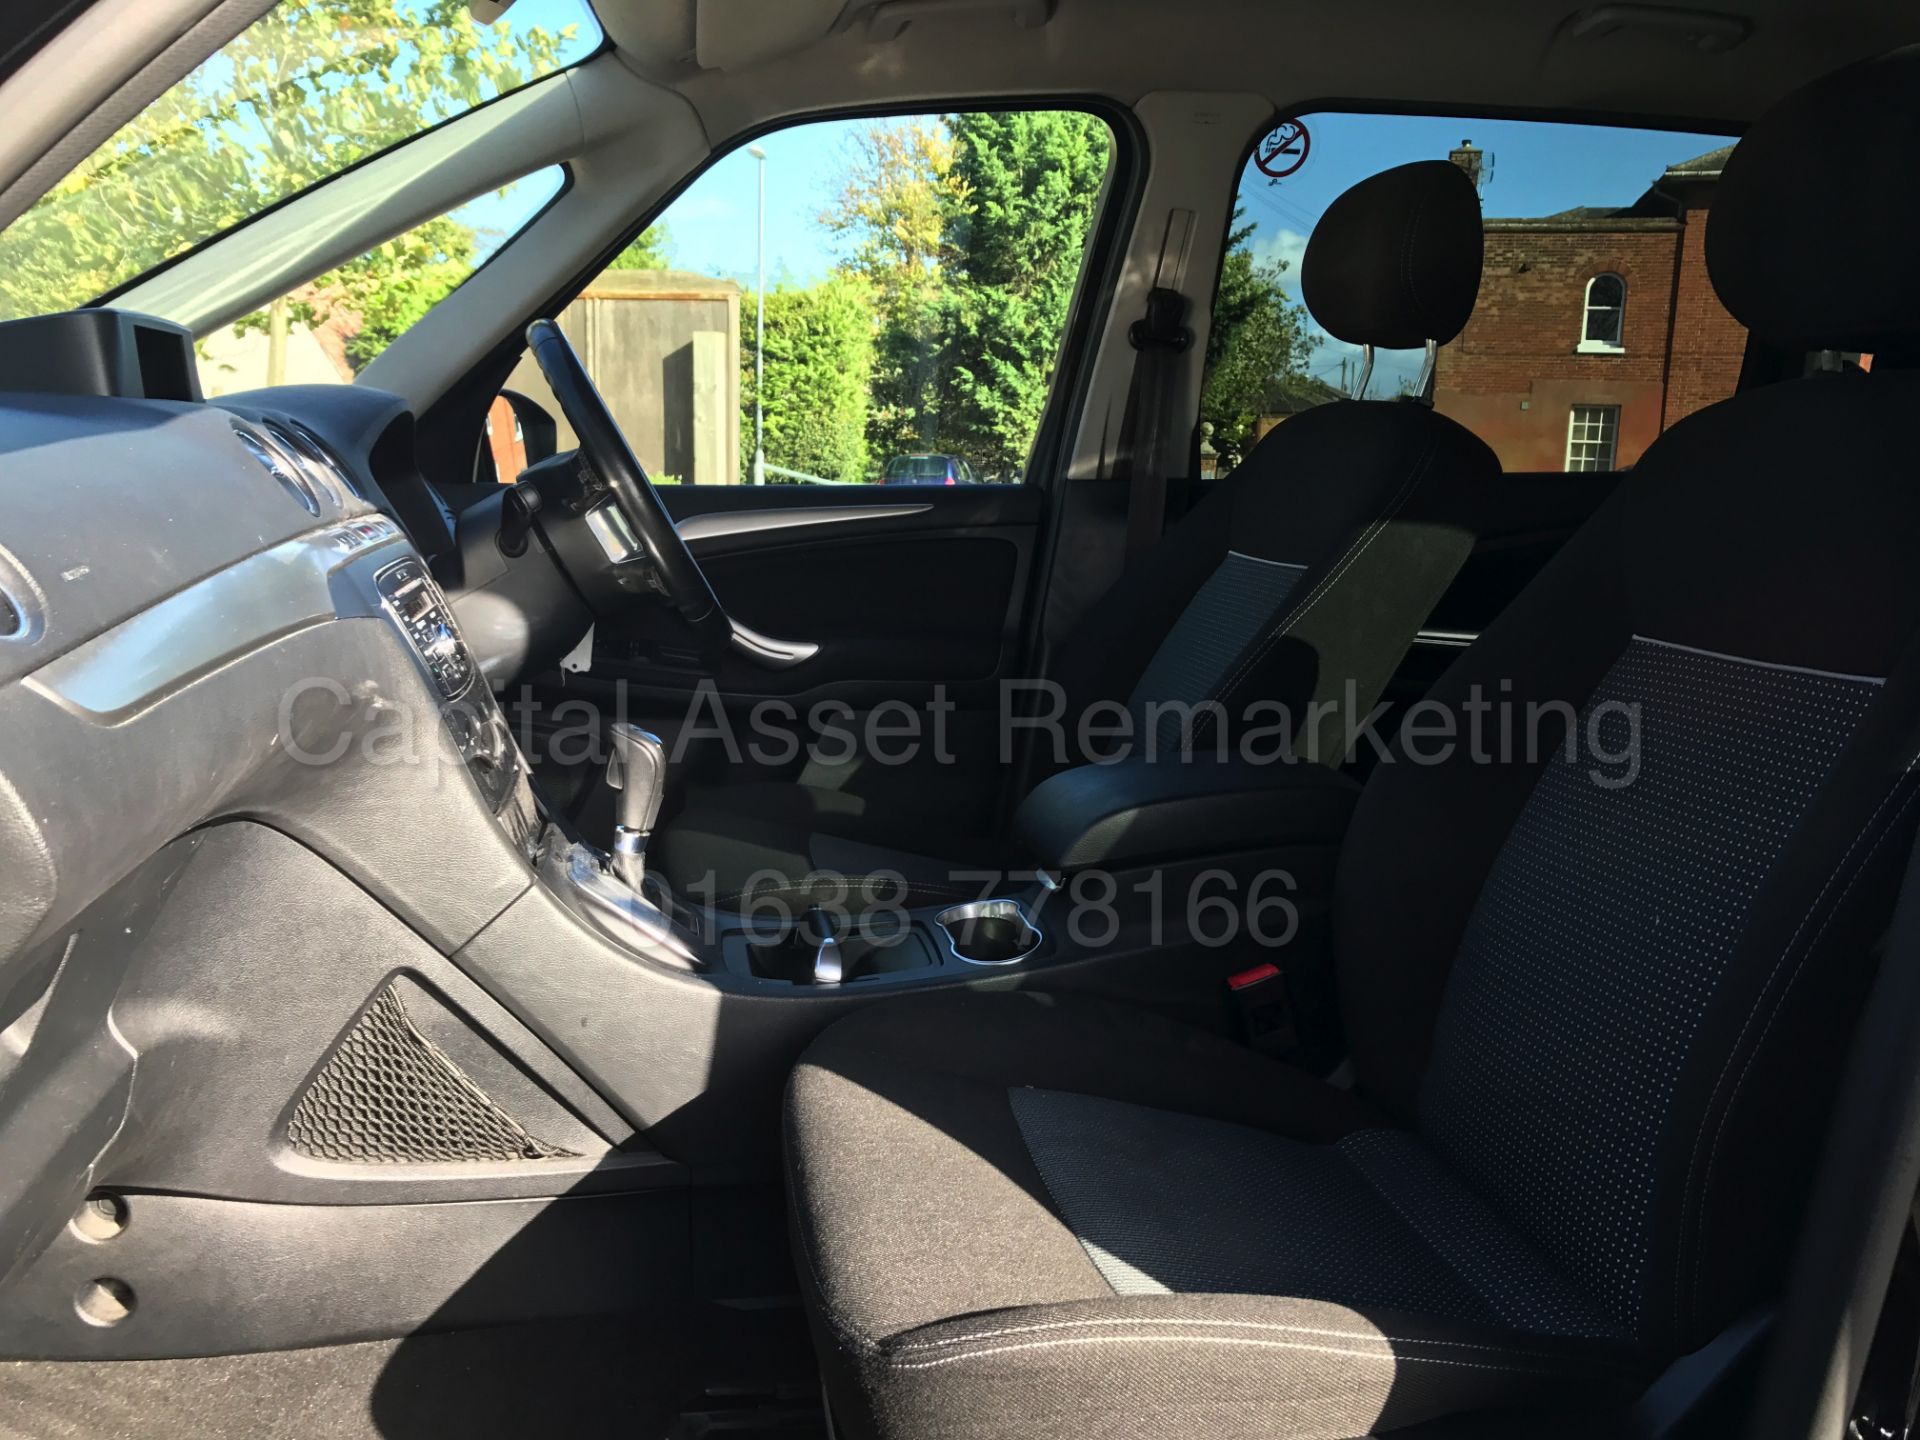 (ON SALE) FORD GALAXY 'ZETEC' 7 SEATER MPV (2014 MODEL) '2.0 TDCI -140 BHP' (1 OWNER) *FULL HISTORY* - Image 13 of 28